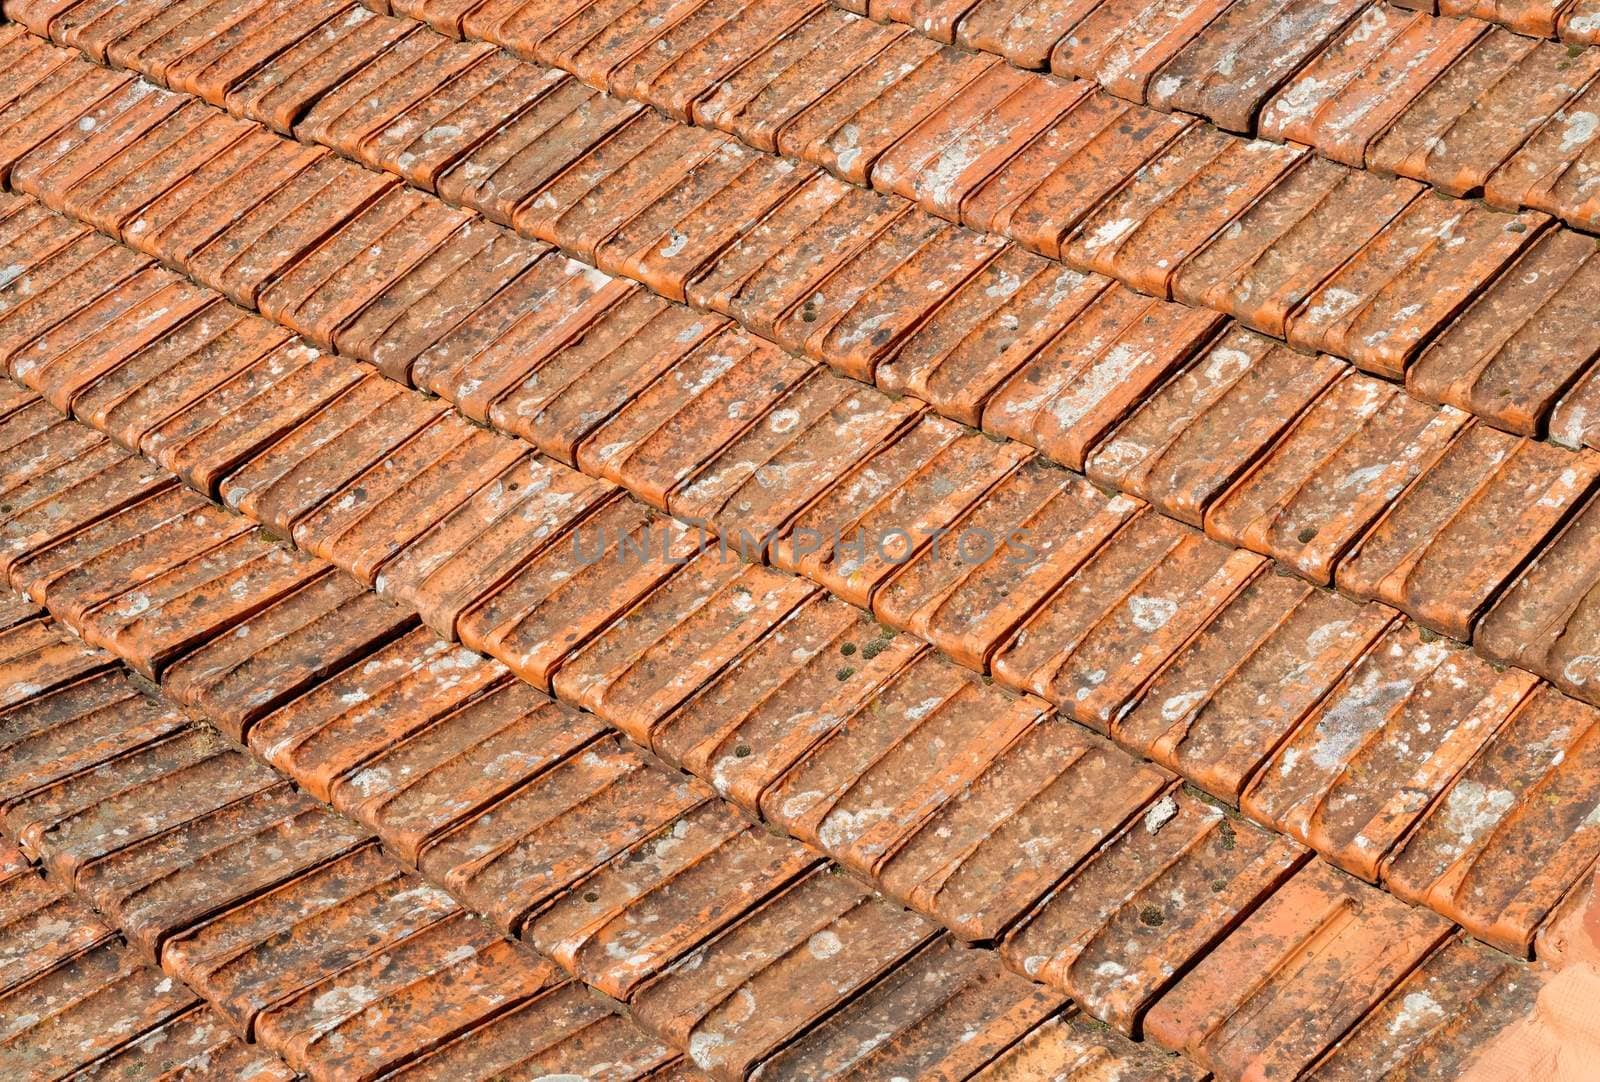 Texture of old orange roof tiles in Sintra, Portugal